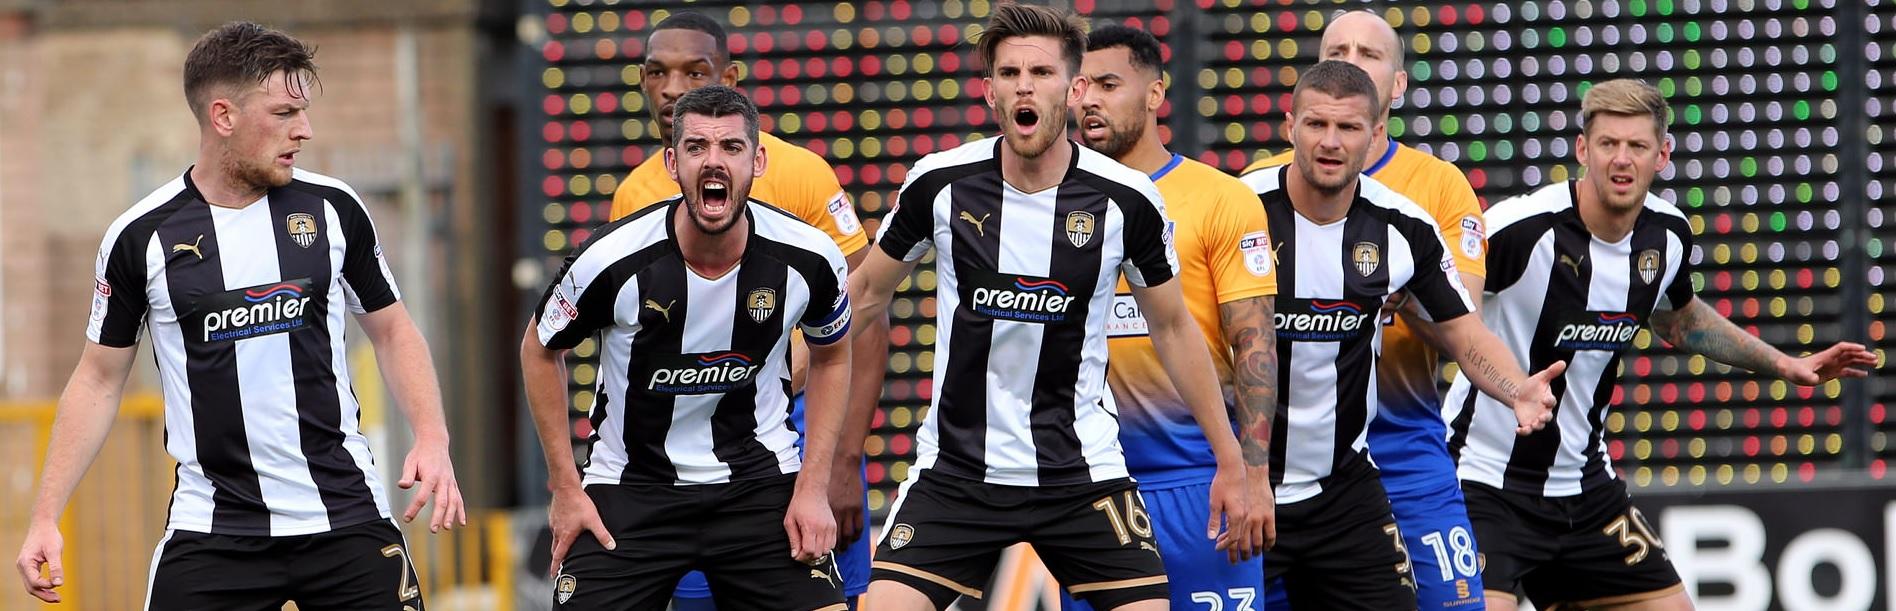 More information about "ARLukomski: Why have Notts County changed formation?"